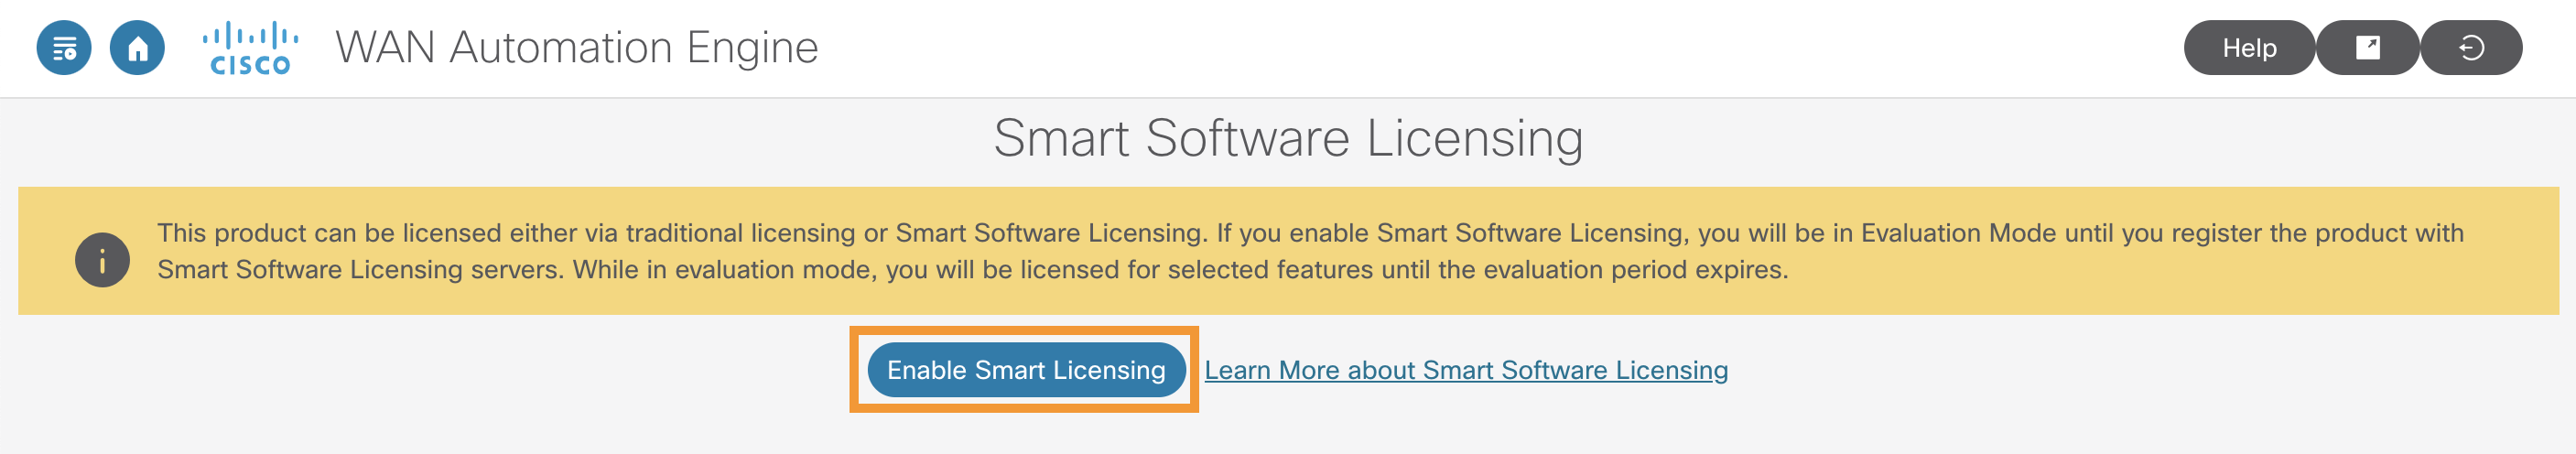 Enable Smart Licensing Selection